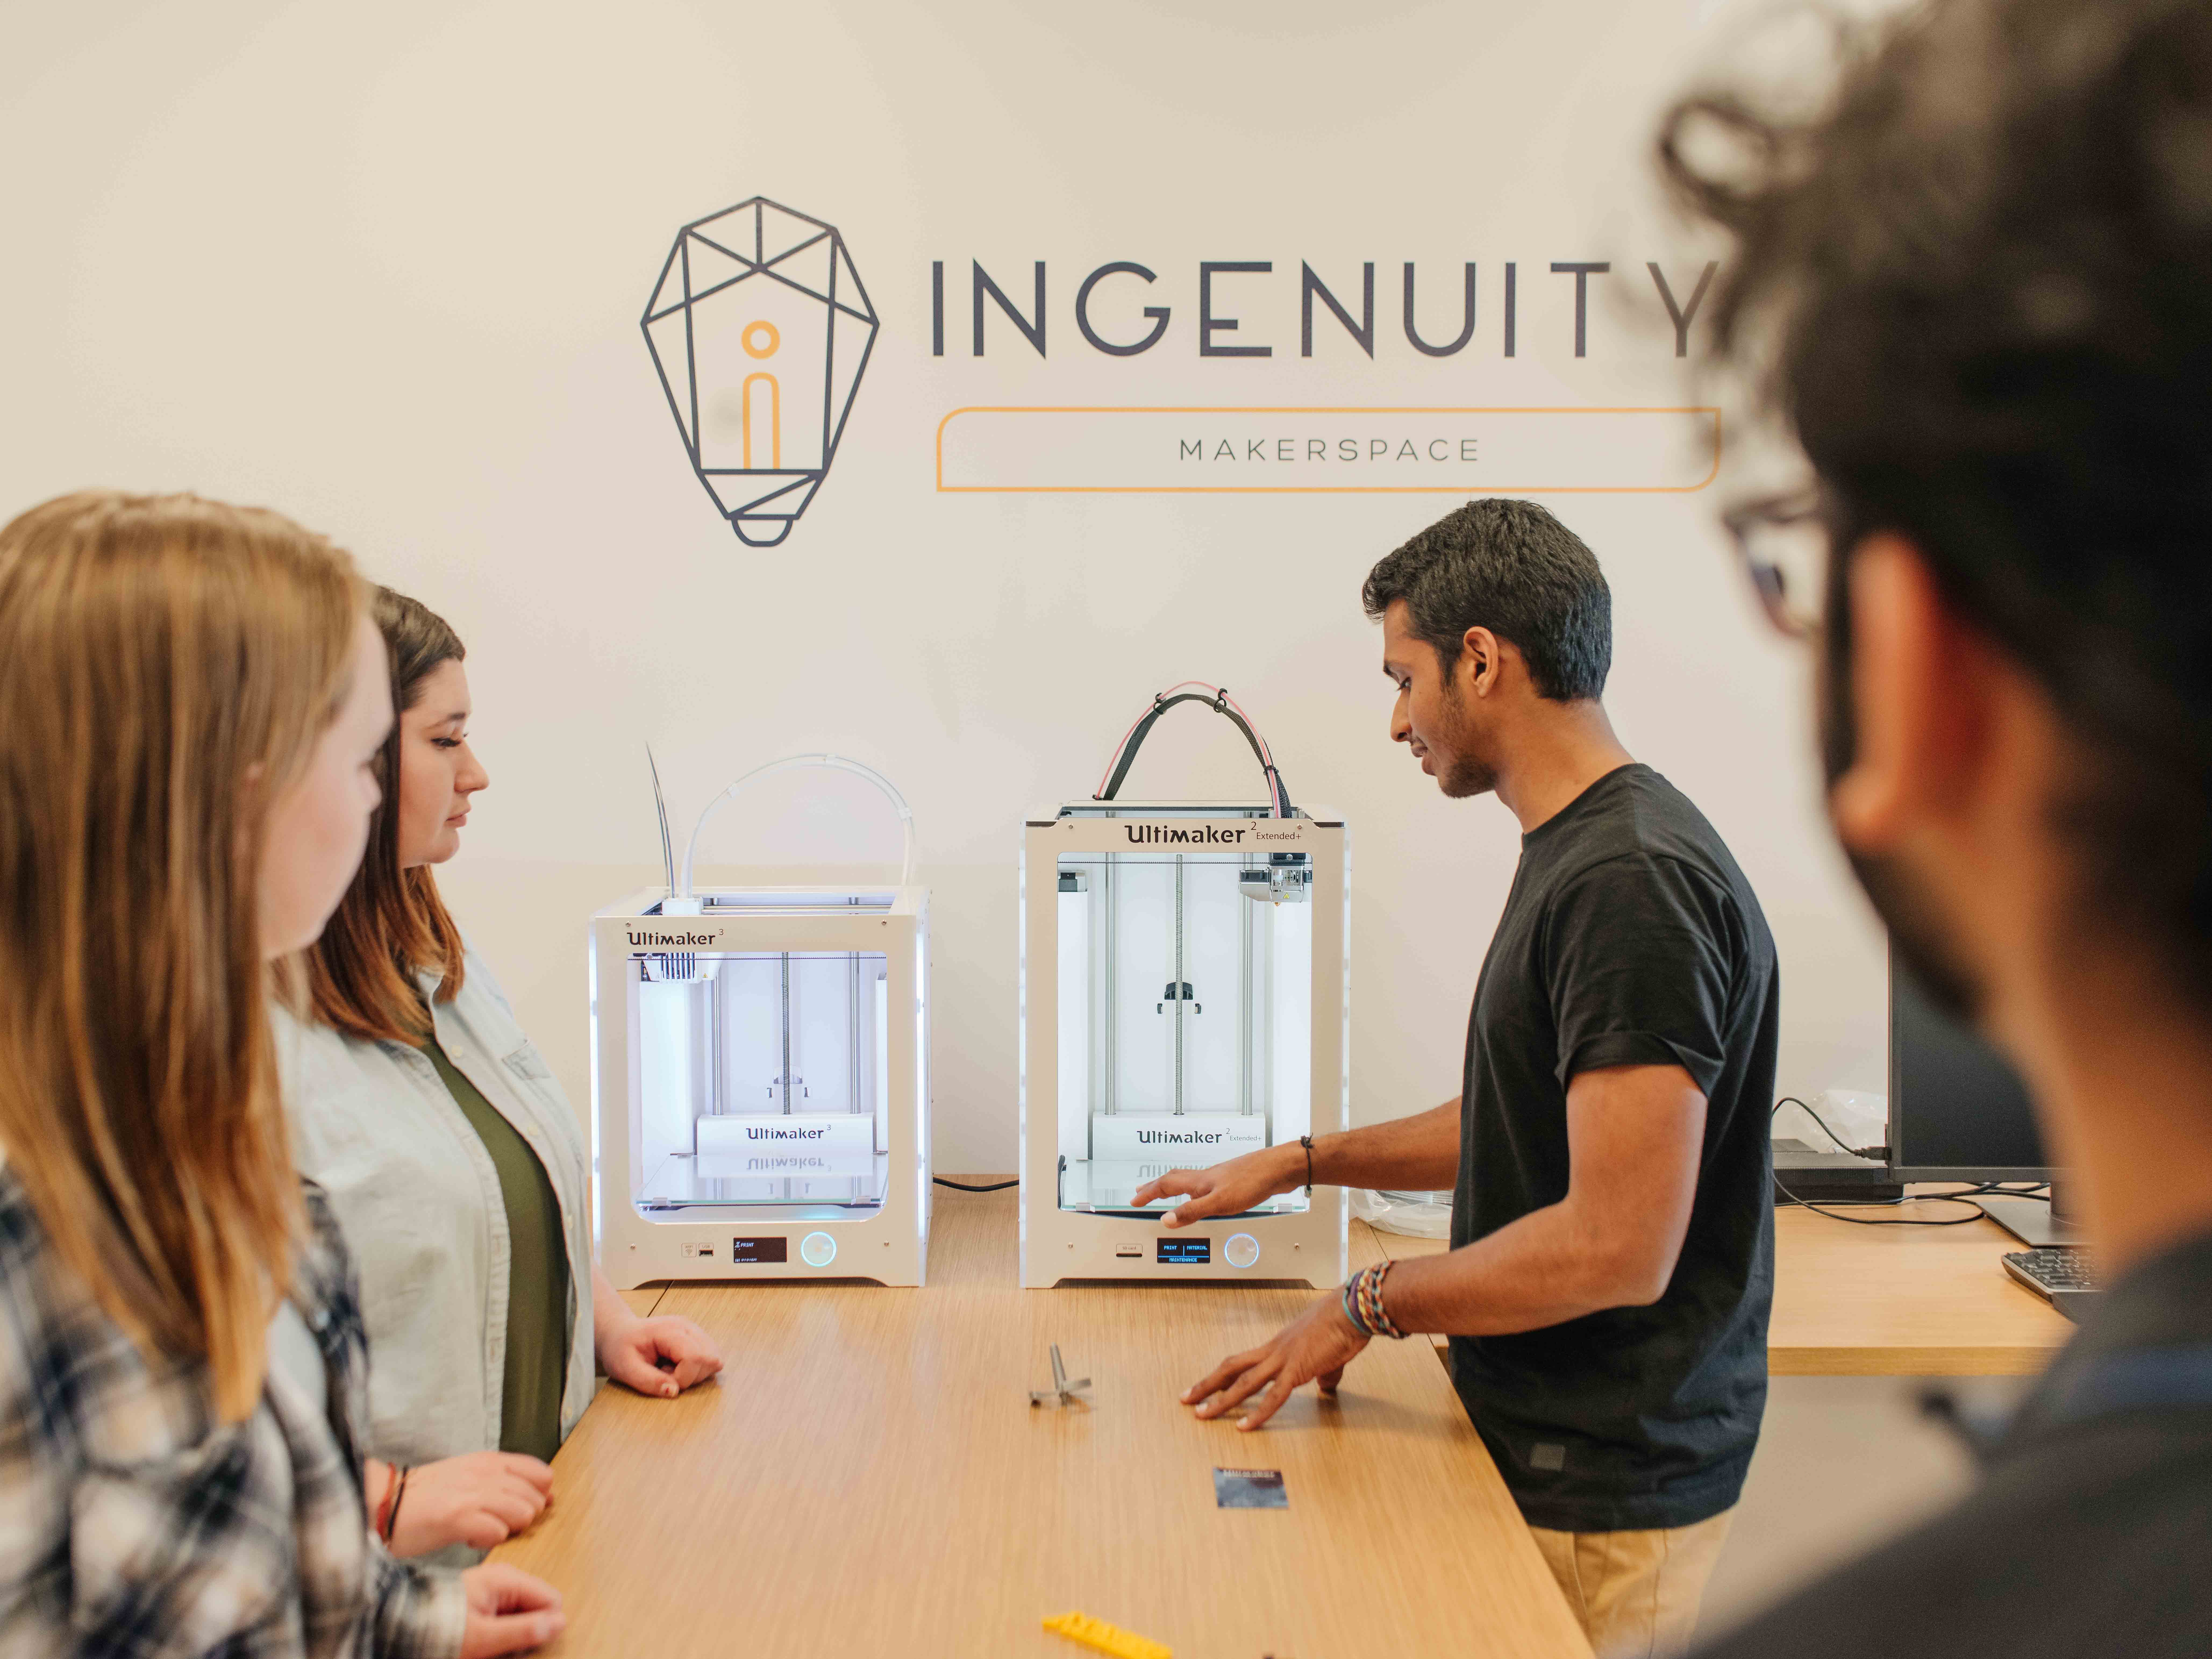 Students Interacting in Ingenuity Community Space